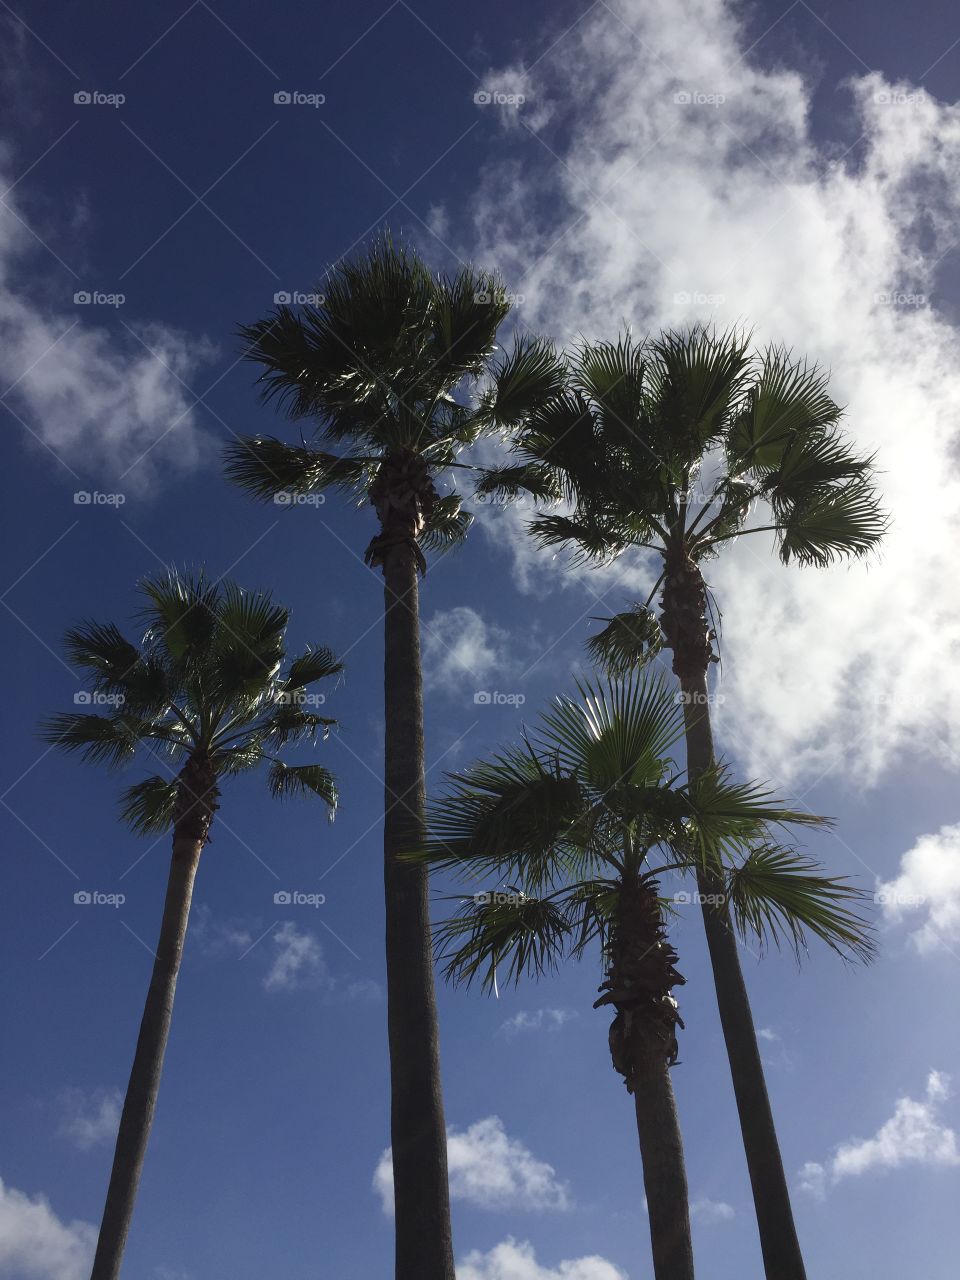 Palm trees with blue sky and some clouds in the background.